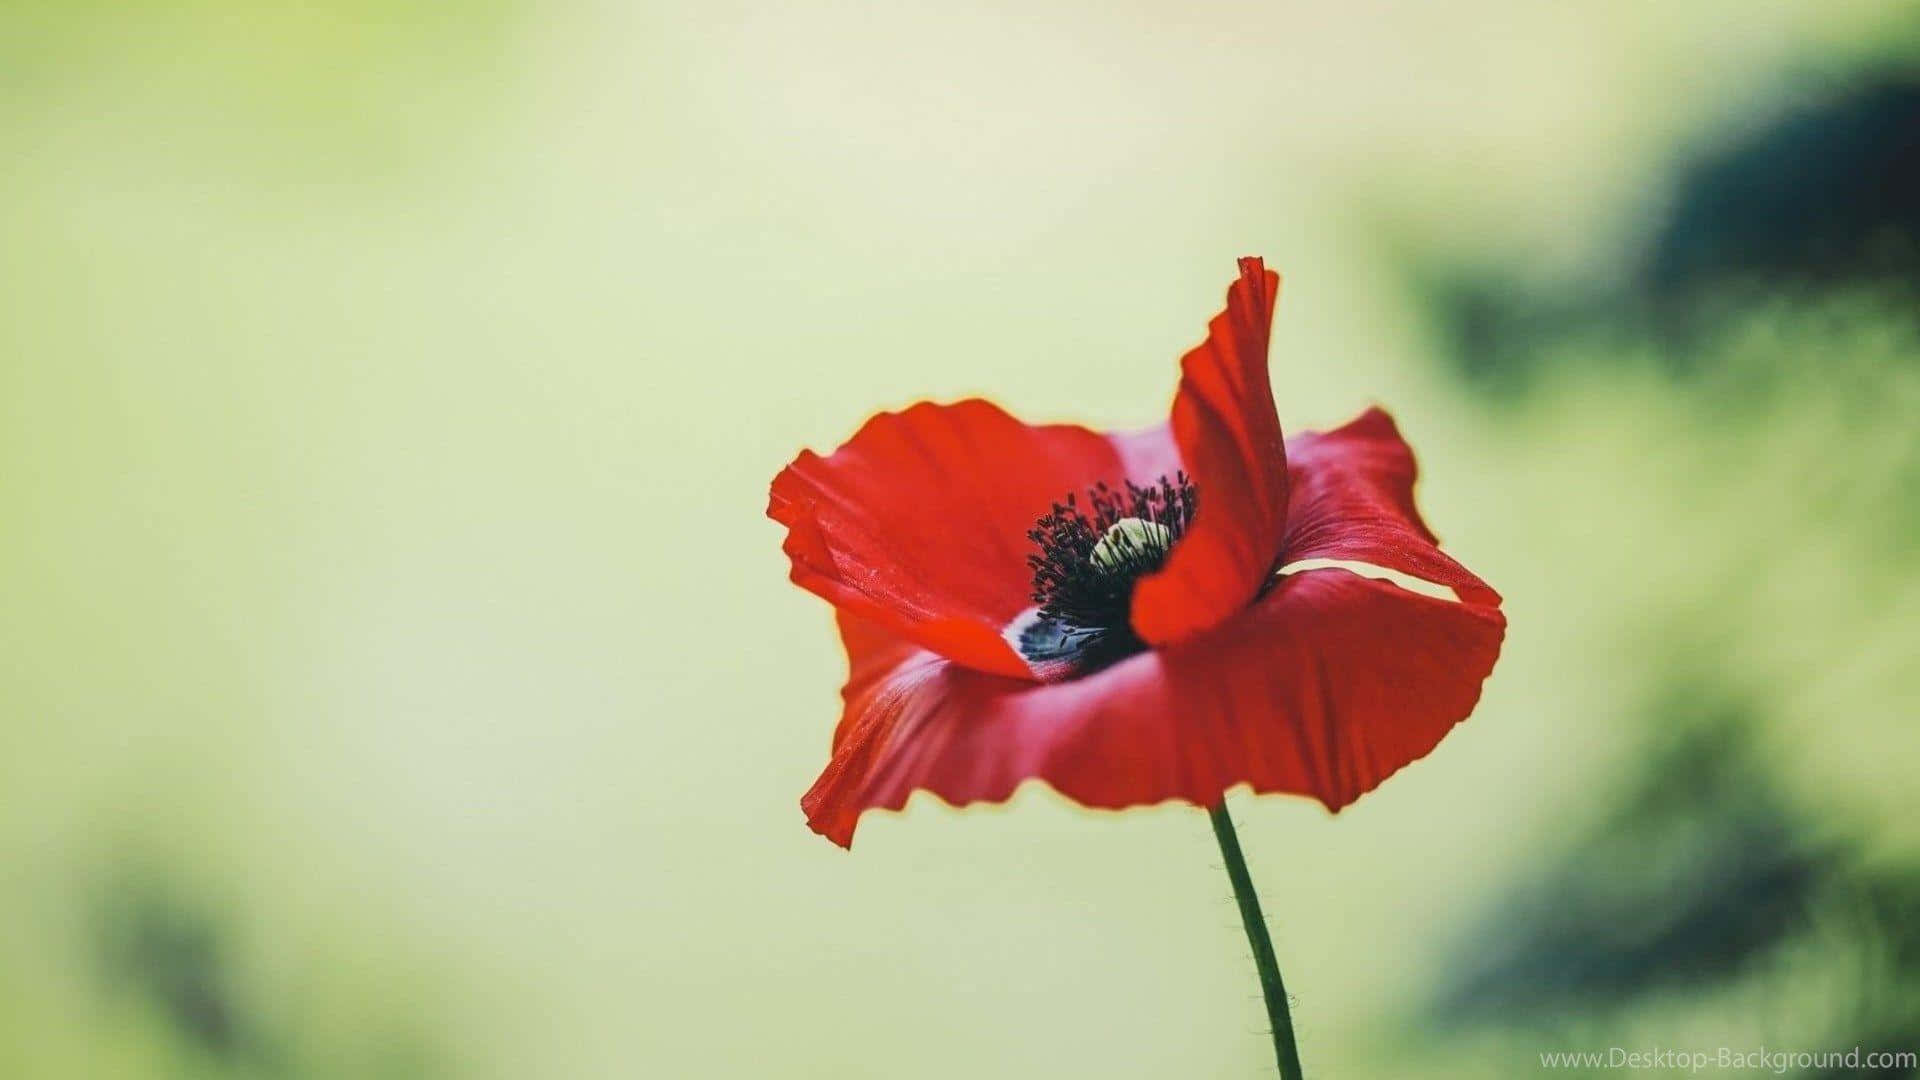 "A blooming poppy garden is a thing of beauty."